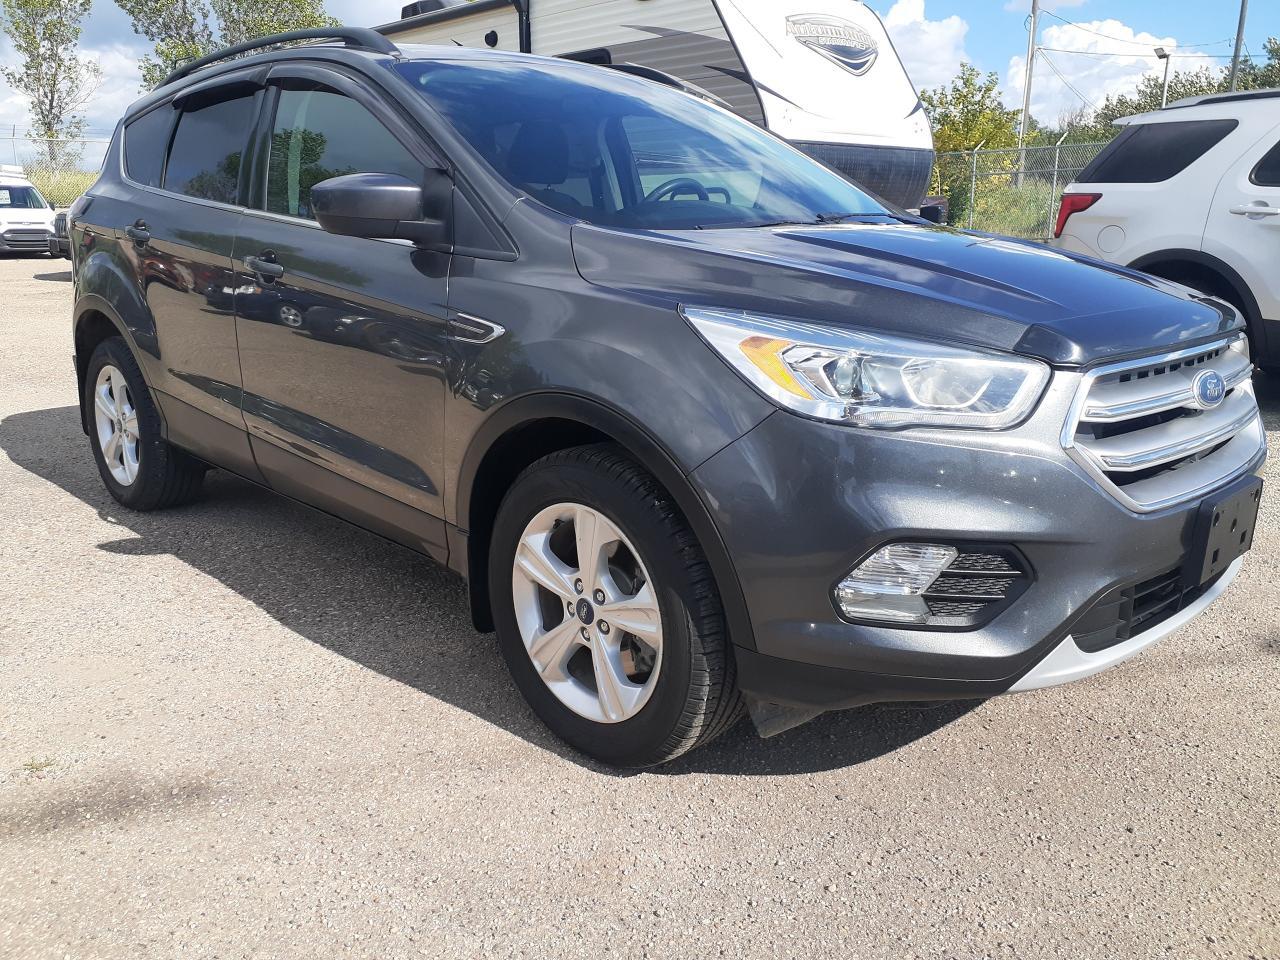 2017 Ford Escape SE AWD Large BU Cam, Htd Seats, Power Seat